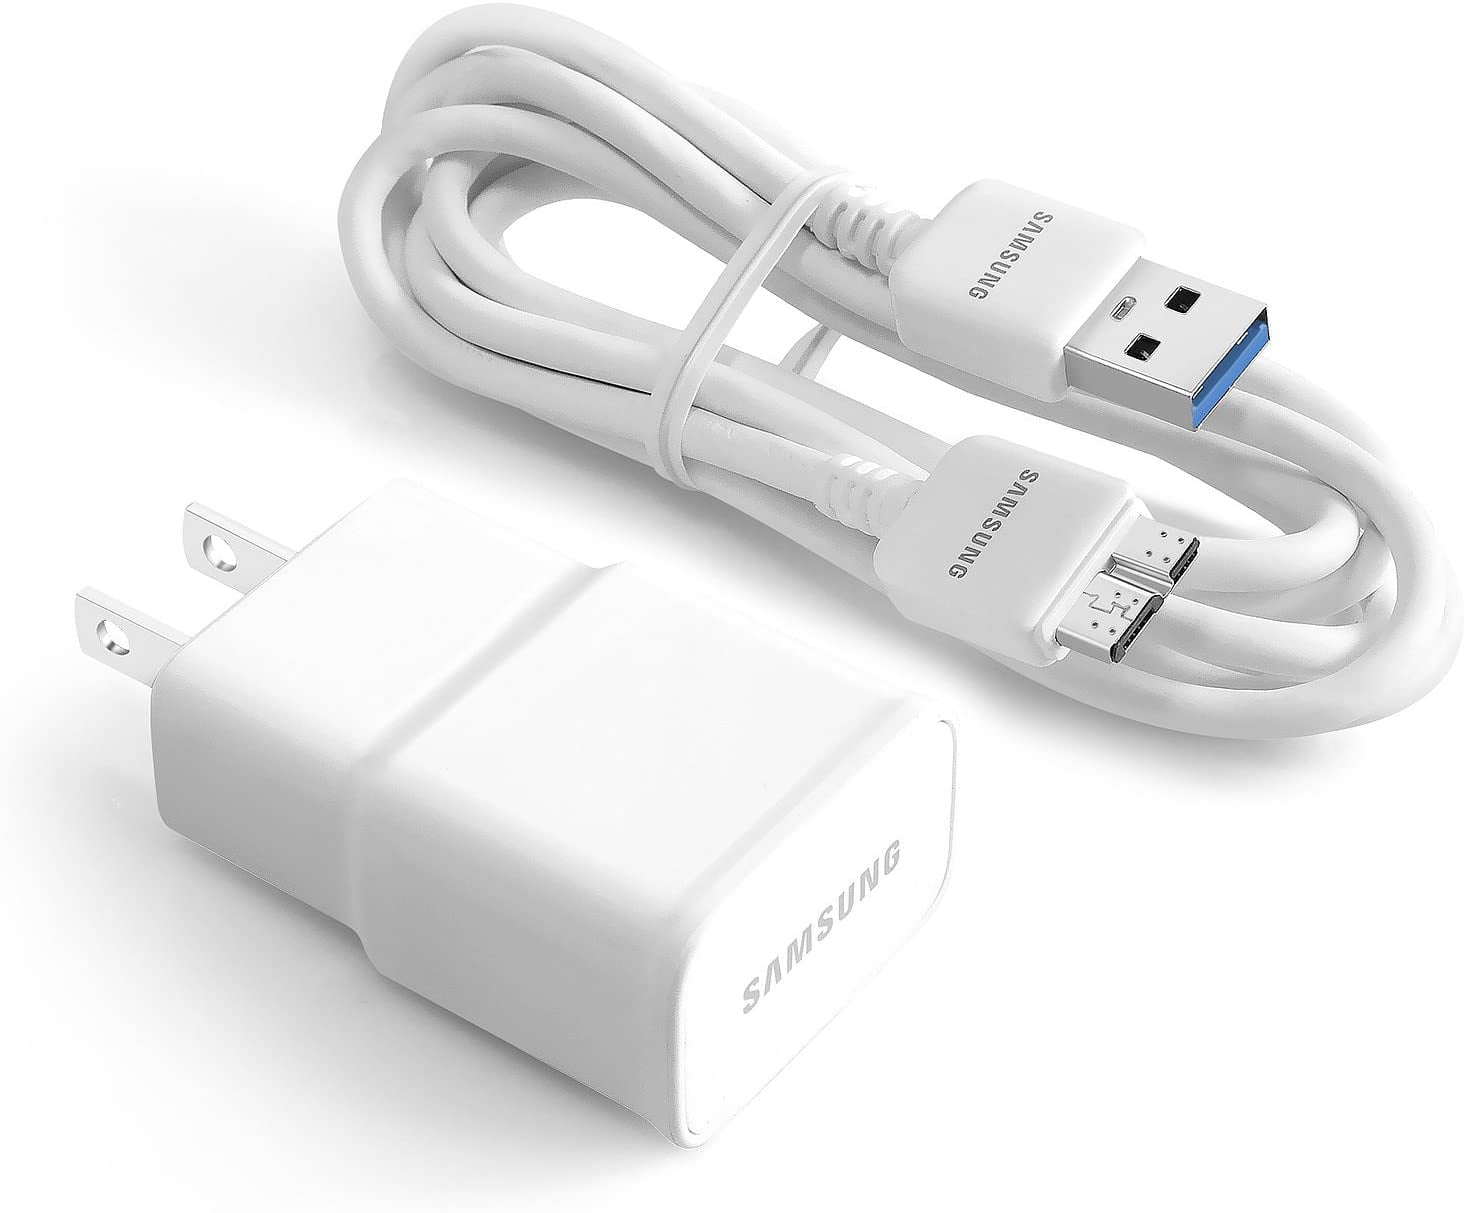 Samsung Galaxy S5 Plus Adaptive Fast Charger Micro USB 2.0 Charging [1 Wall Charger 5 FT Micro USB Cable] Dual voltages for up to 60% Faster Charging! White - Walmart.com